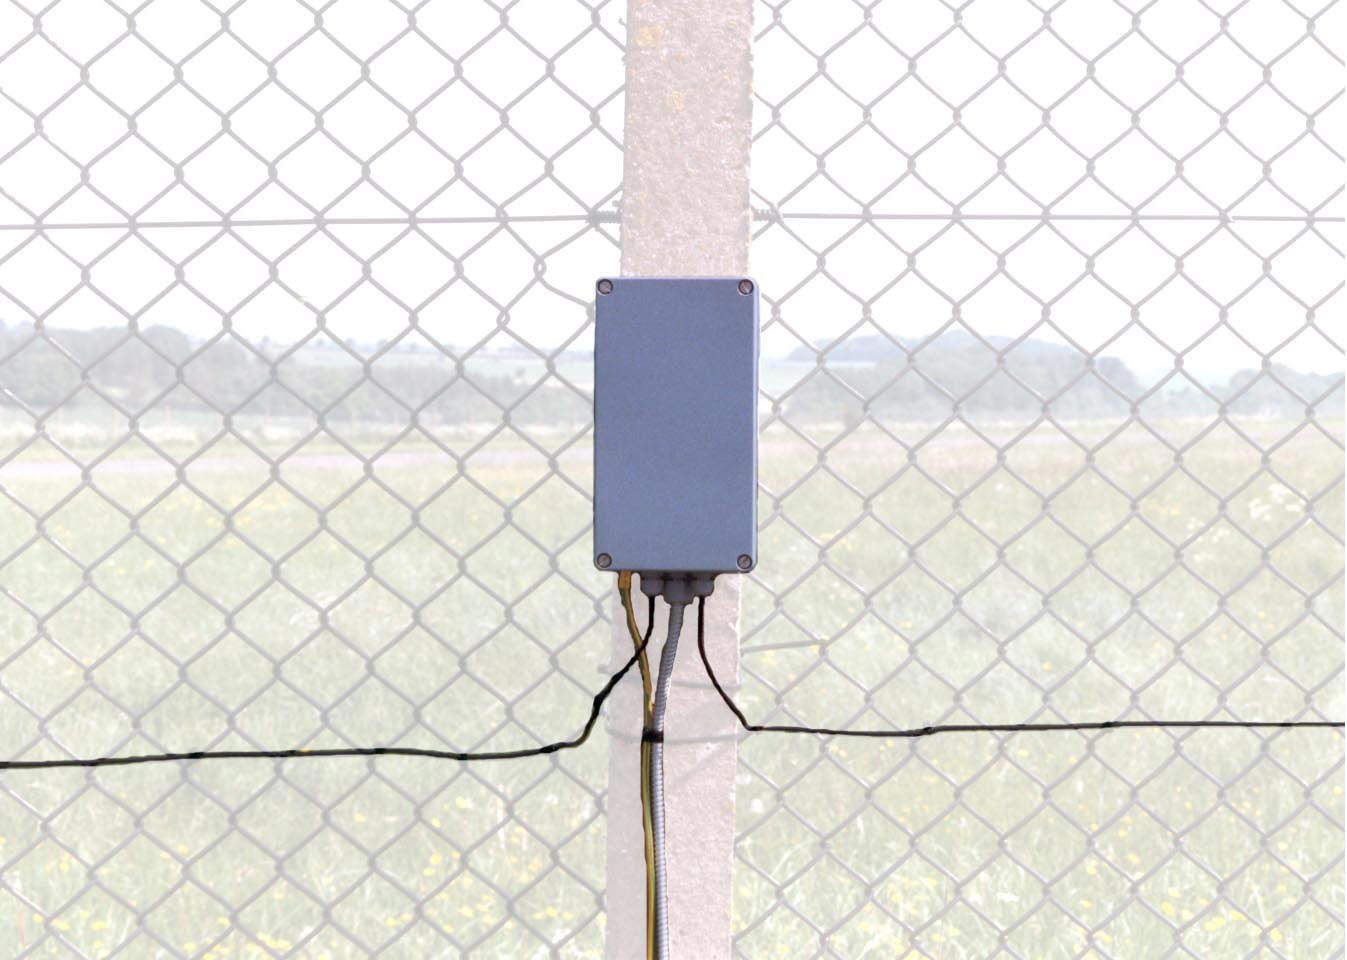 Perimeter fence protection intrusion detection alarm system at an affordable cost for a wide range of applications. Easy Simple to Install. 